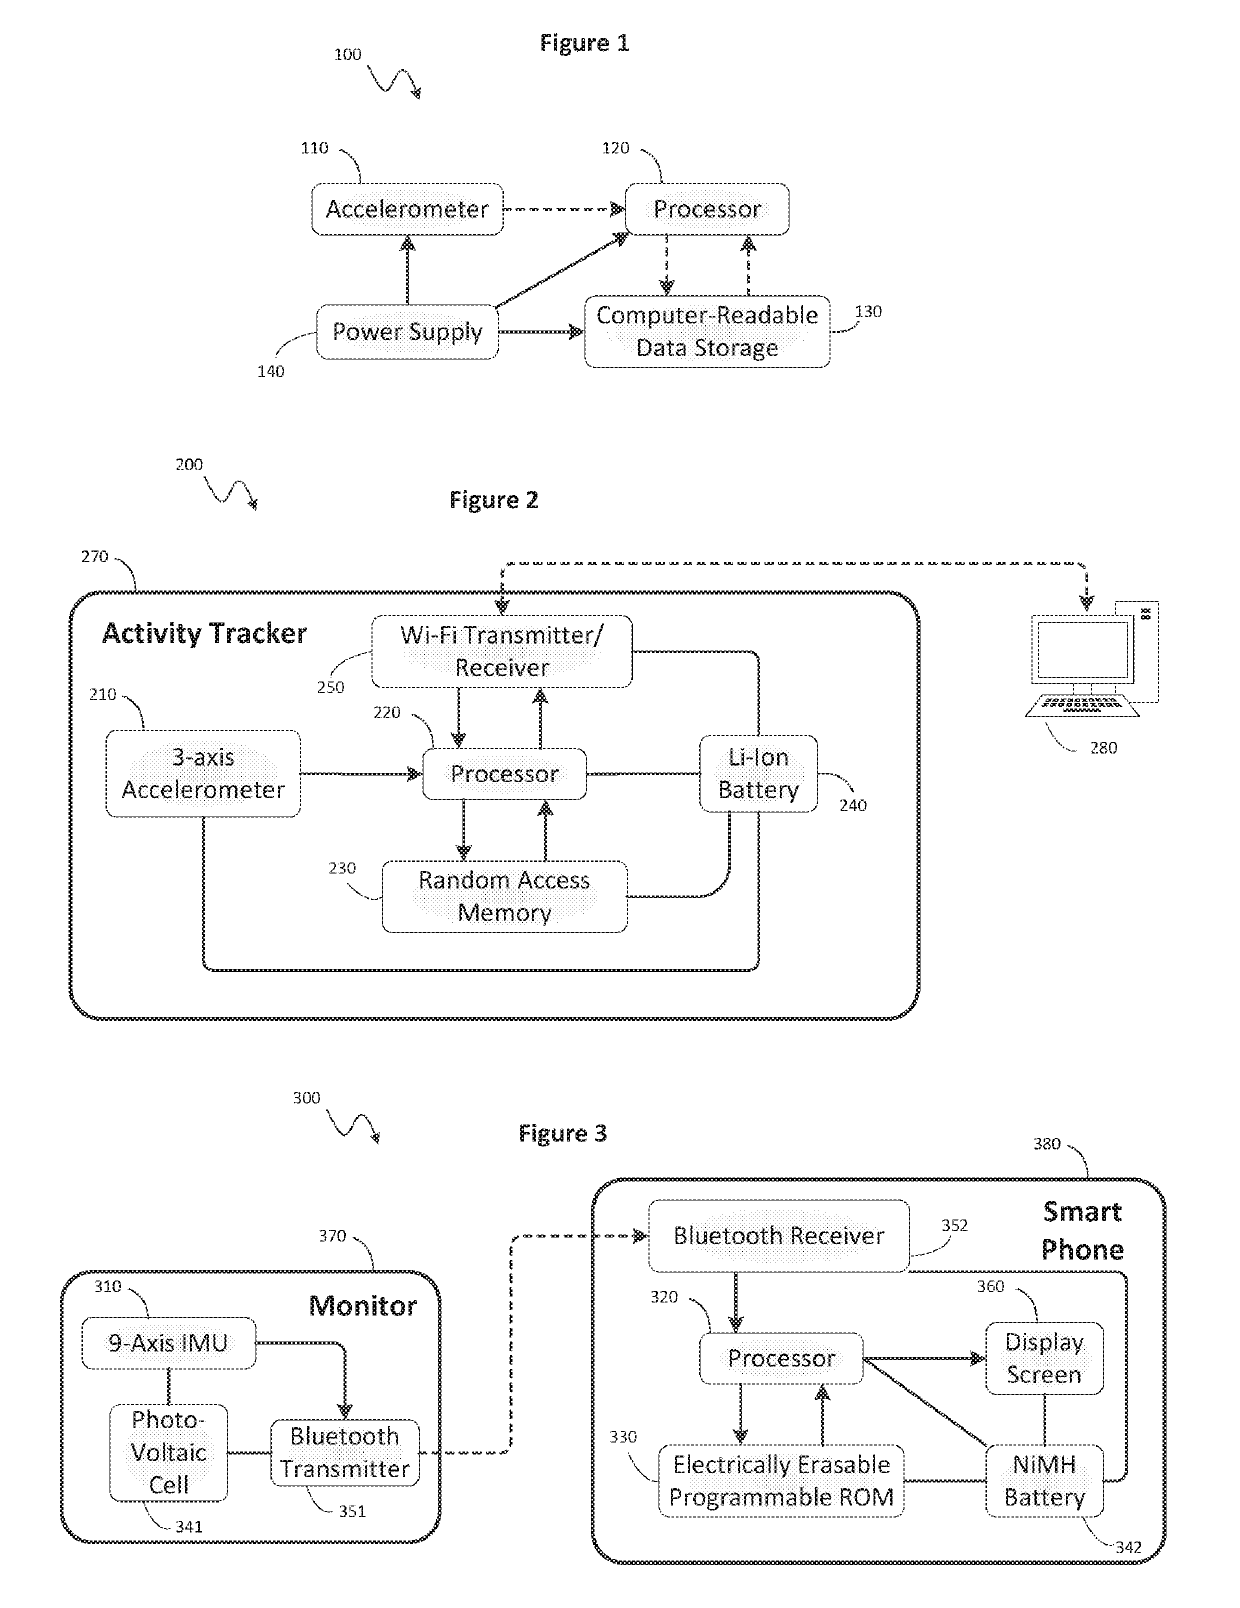 Systems and methods for selecting accelerometer data to store on computer-readable media